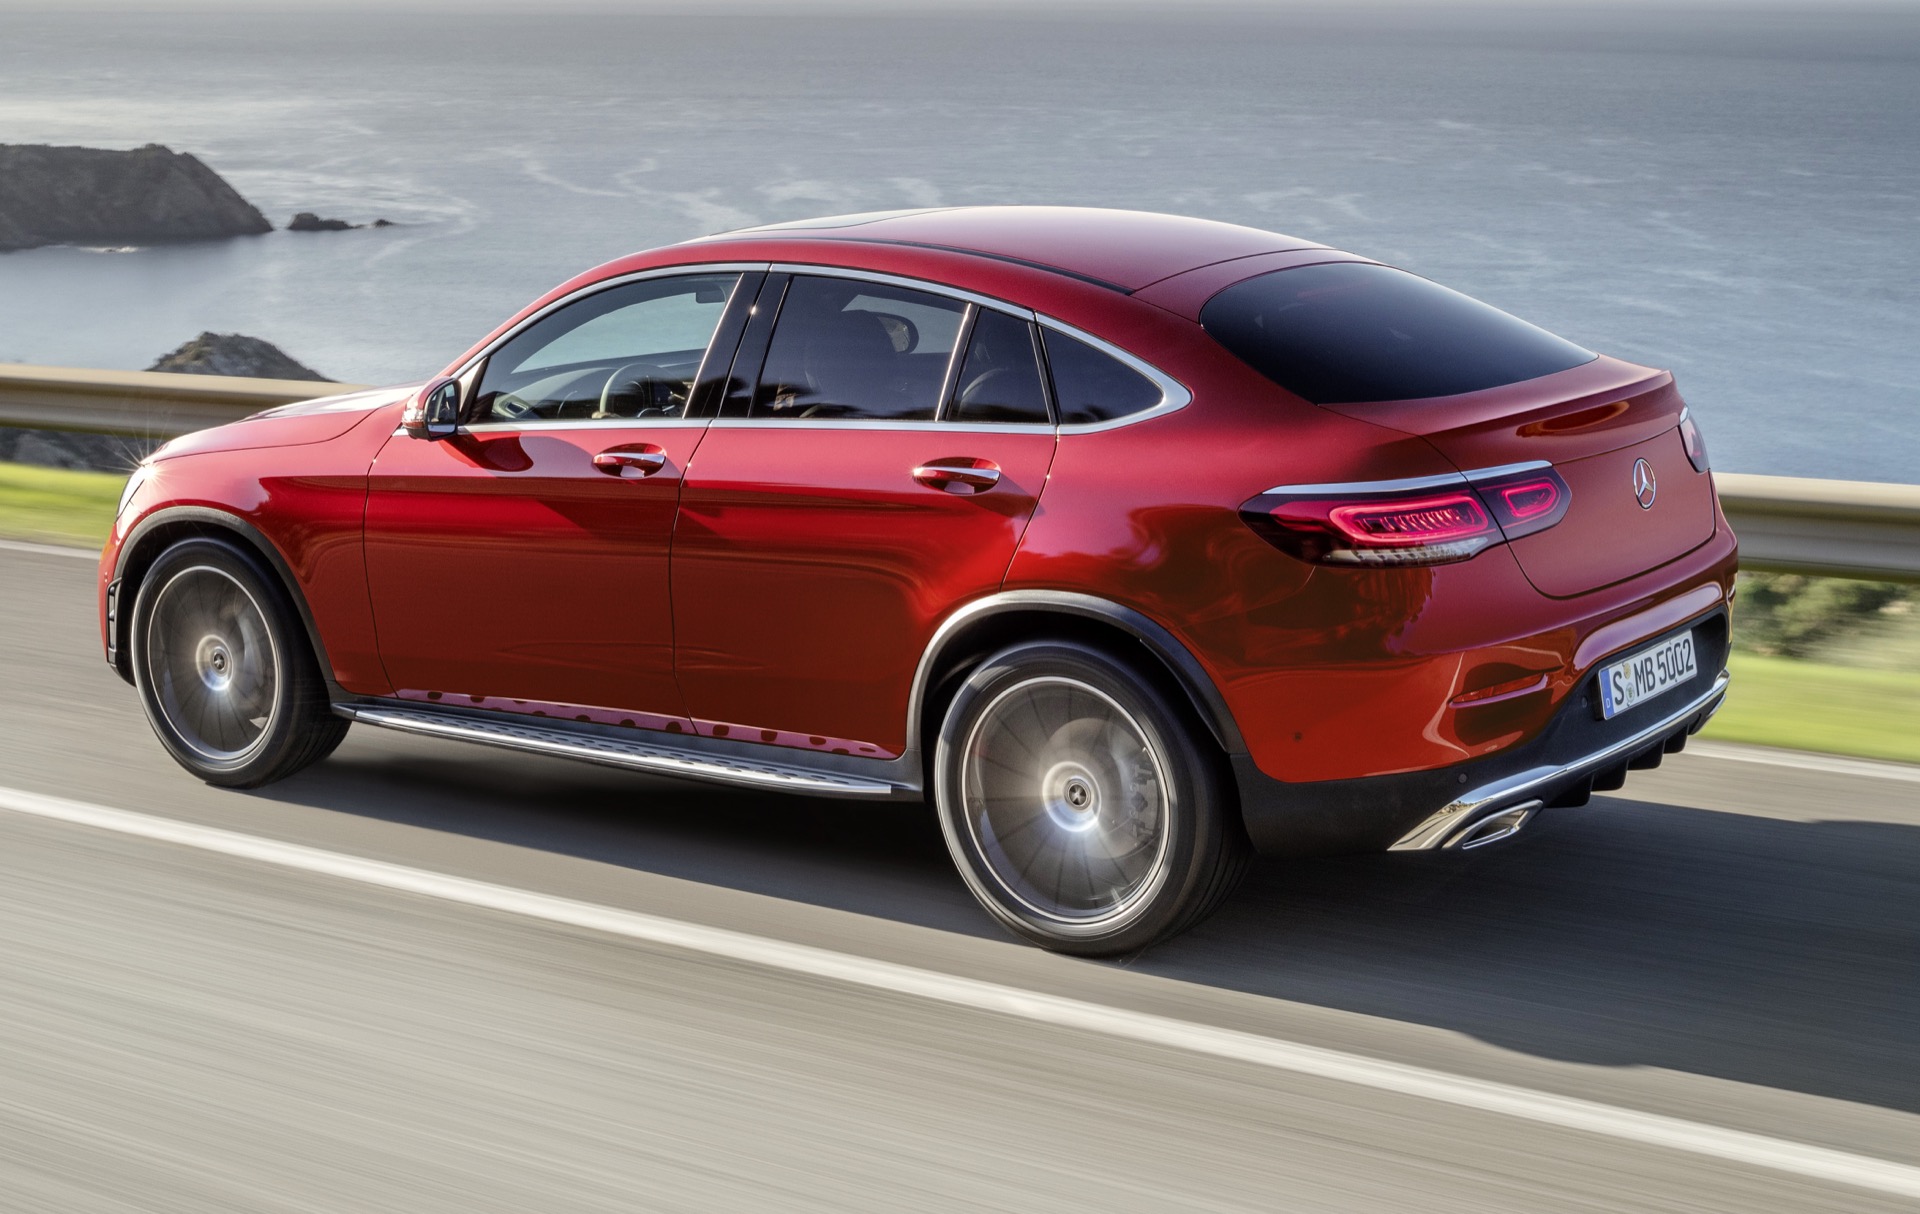 red Mercedes-Benz GLC-Class Coupe rear angular view turn on the road